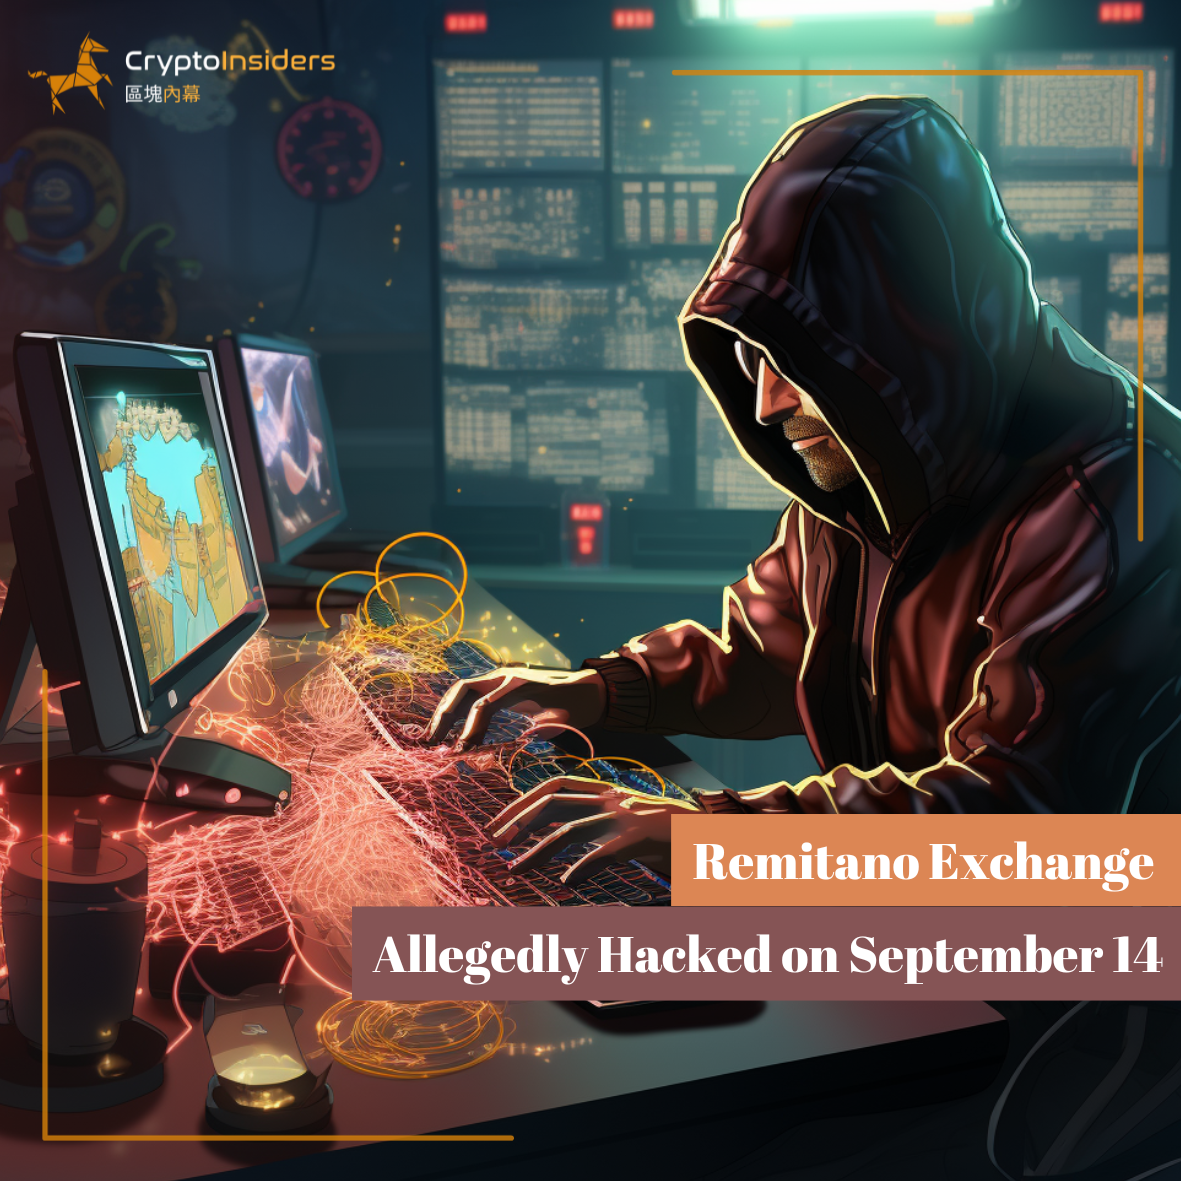 Remitano-Exchange-Allegedly-Hacked-on-September-14-Crypto-Insiders-Hong-Kong-Blockchain-News